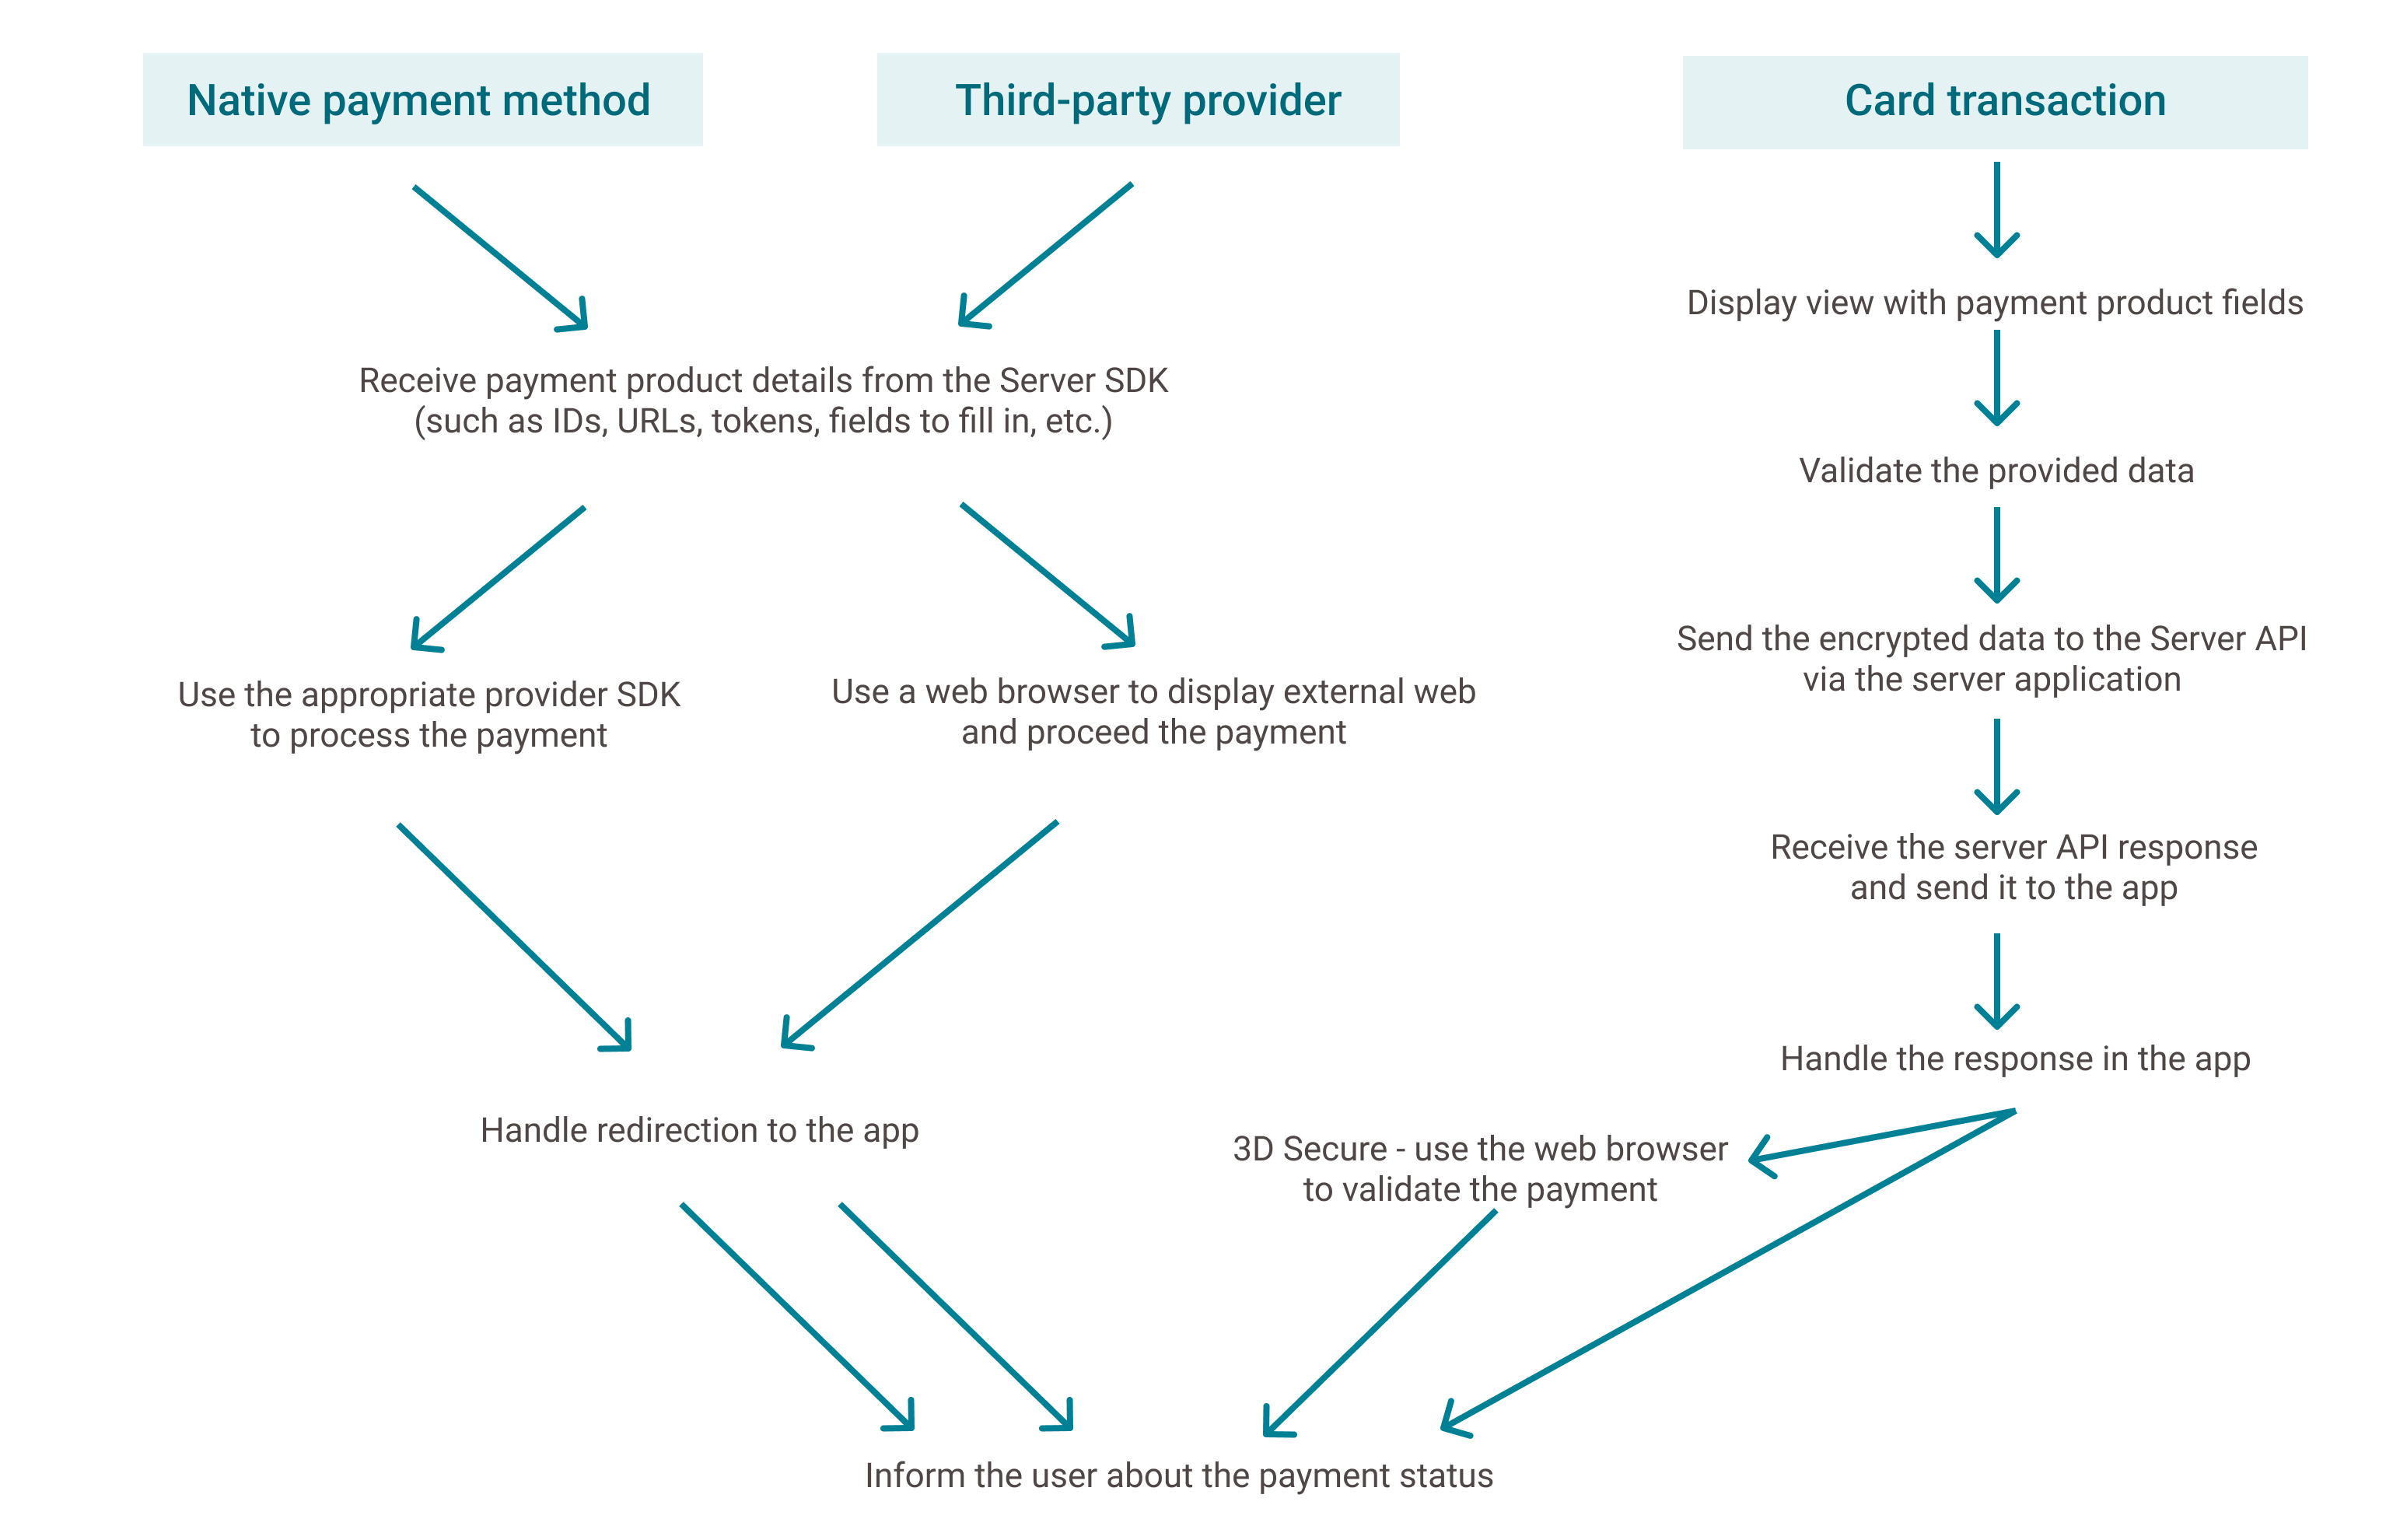 The graphic above shows the different data flows depending on the chosen payment method.